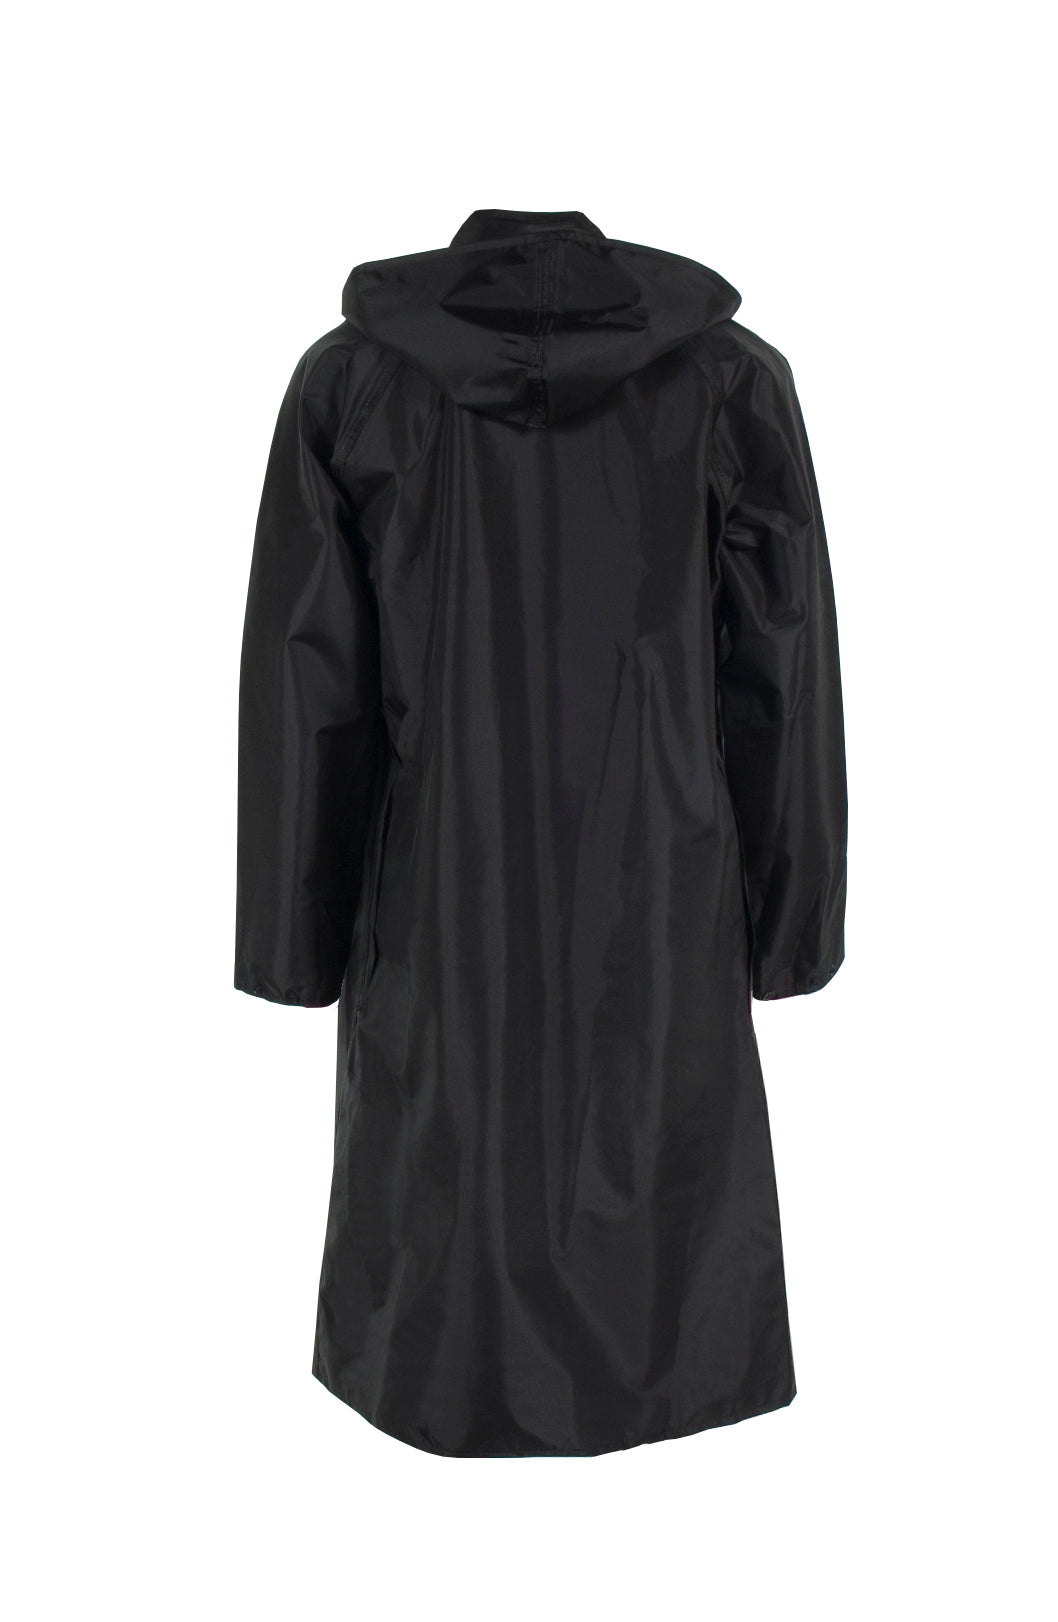 4703RCH3M Safe Officer Series Reversible Raincoat with Reflective Taping